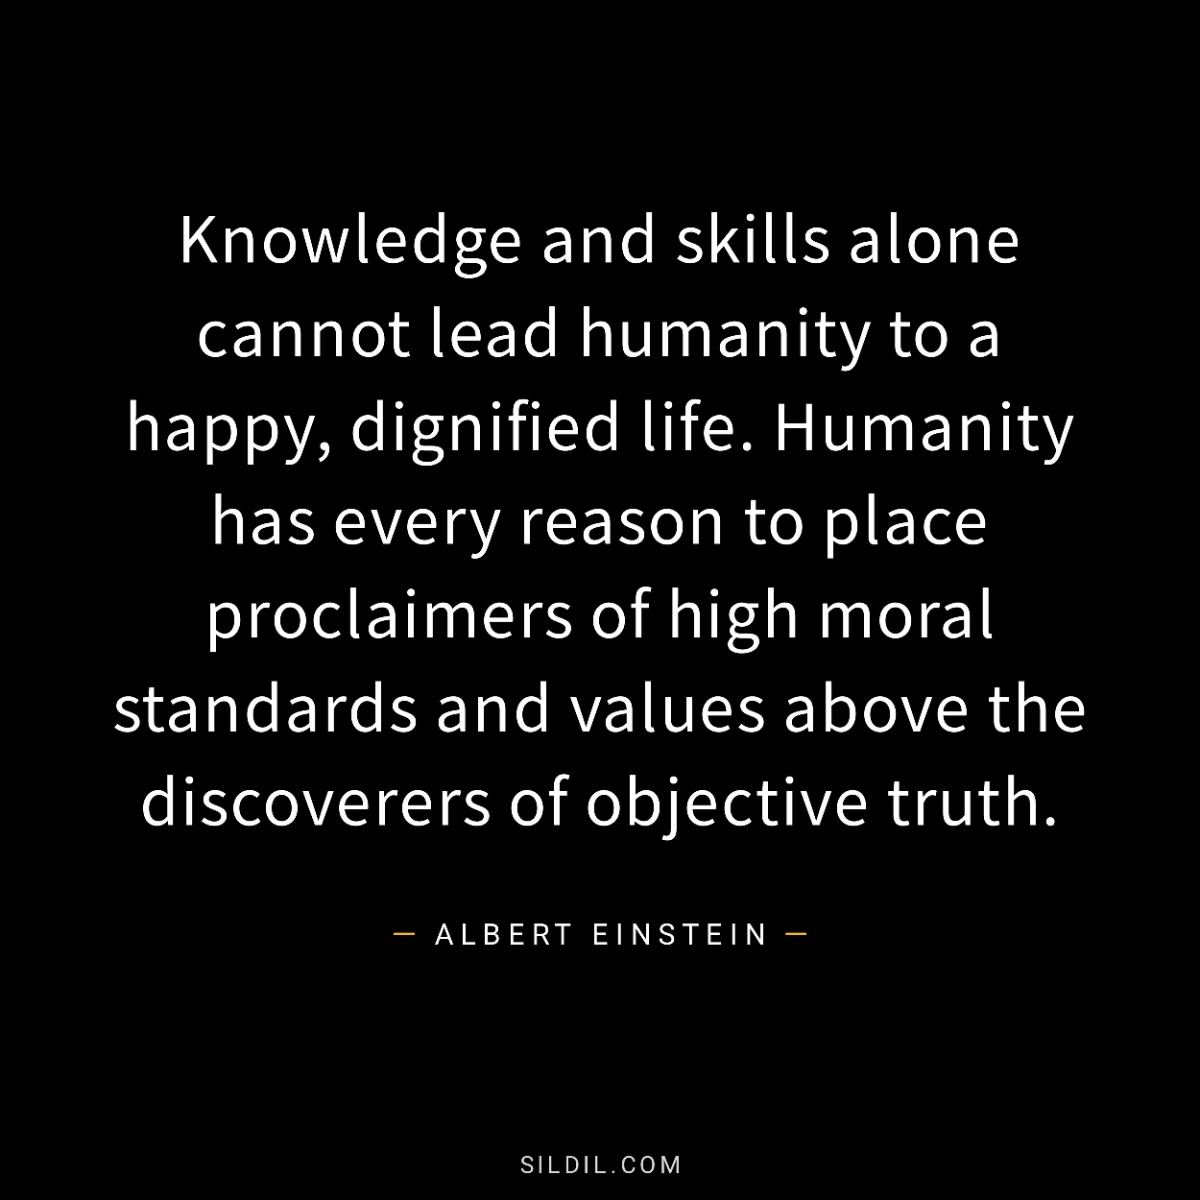 Knowledge and skills alone cannot lead humanity to a happy, dignified life. Humanity has every reason to place proclaimers of high moral standards and values above the discoverers of objective truth.